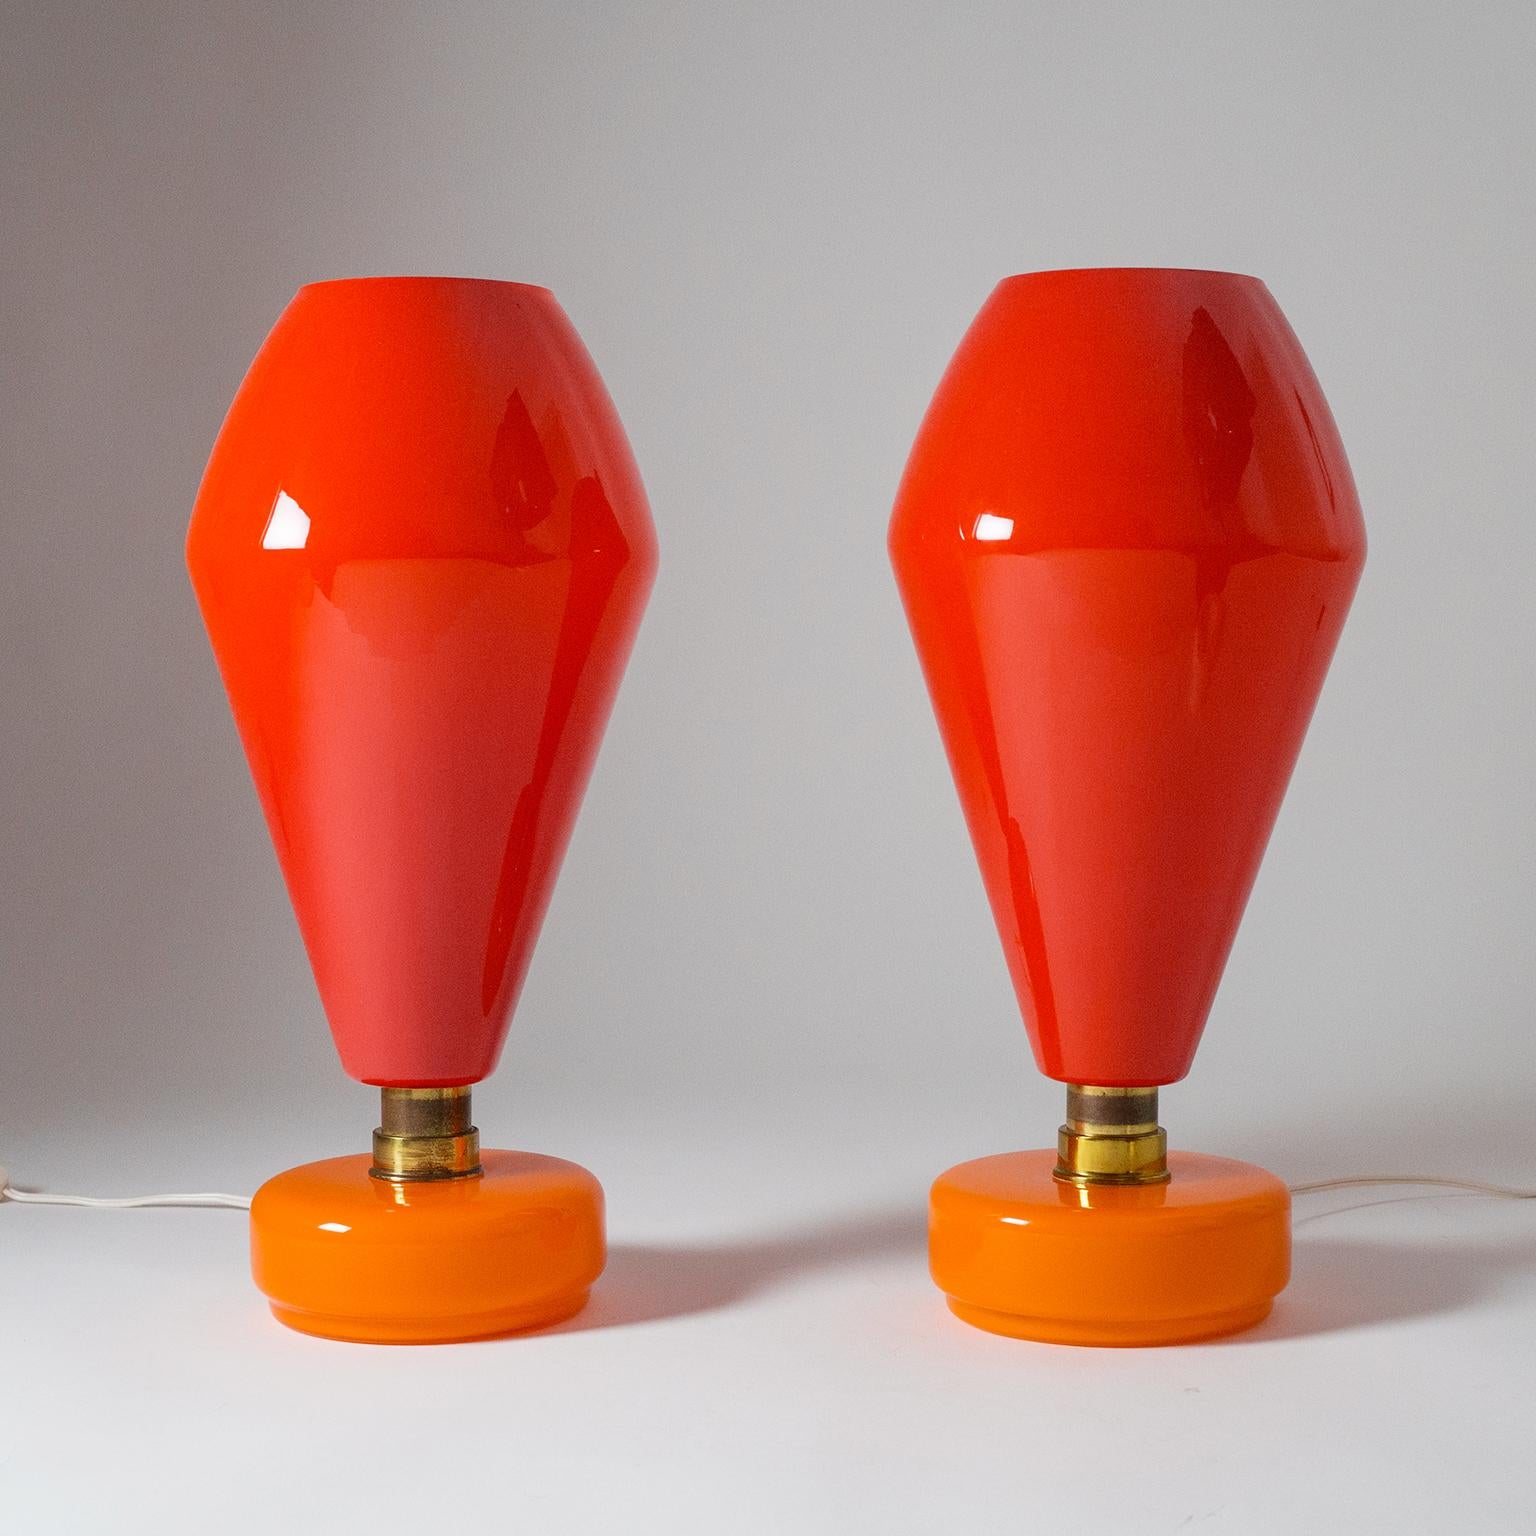 Very unique pair of large Murano glass table lamps by Vistosi. The strong color scheme and bold shape give these an organic pop art character which is amplified by their handblown nature. The large red shades are cased white on the inside and create